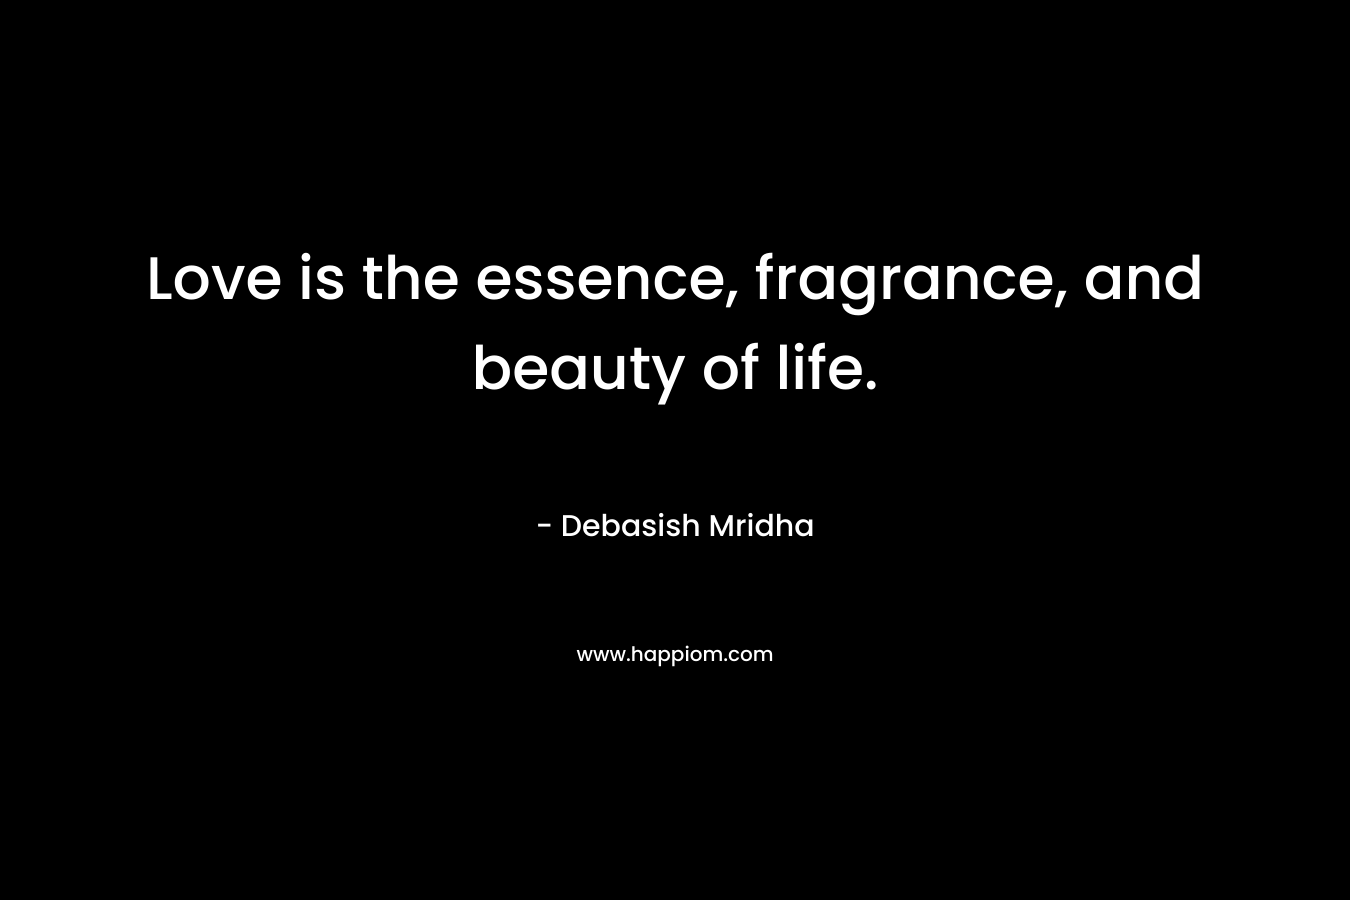 Love is the essence, fragrance, and beauty of life.